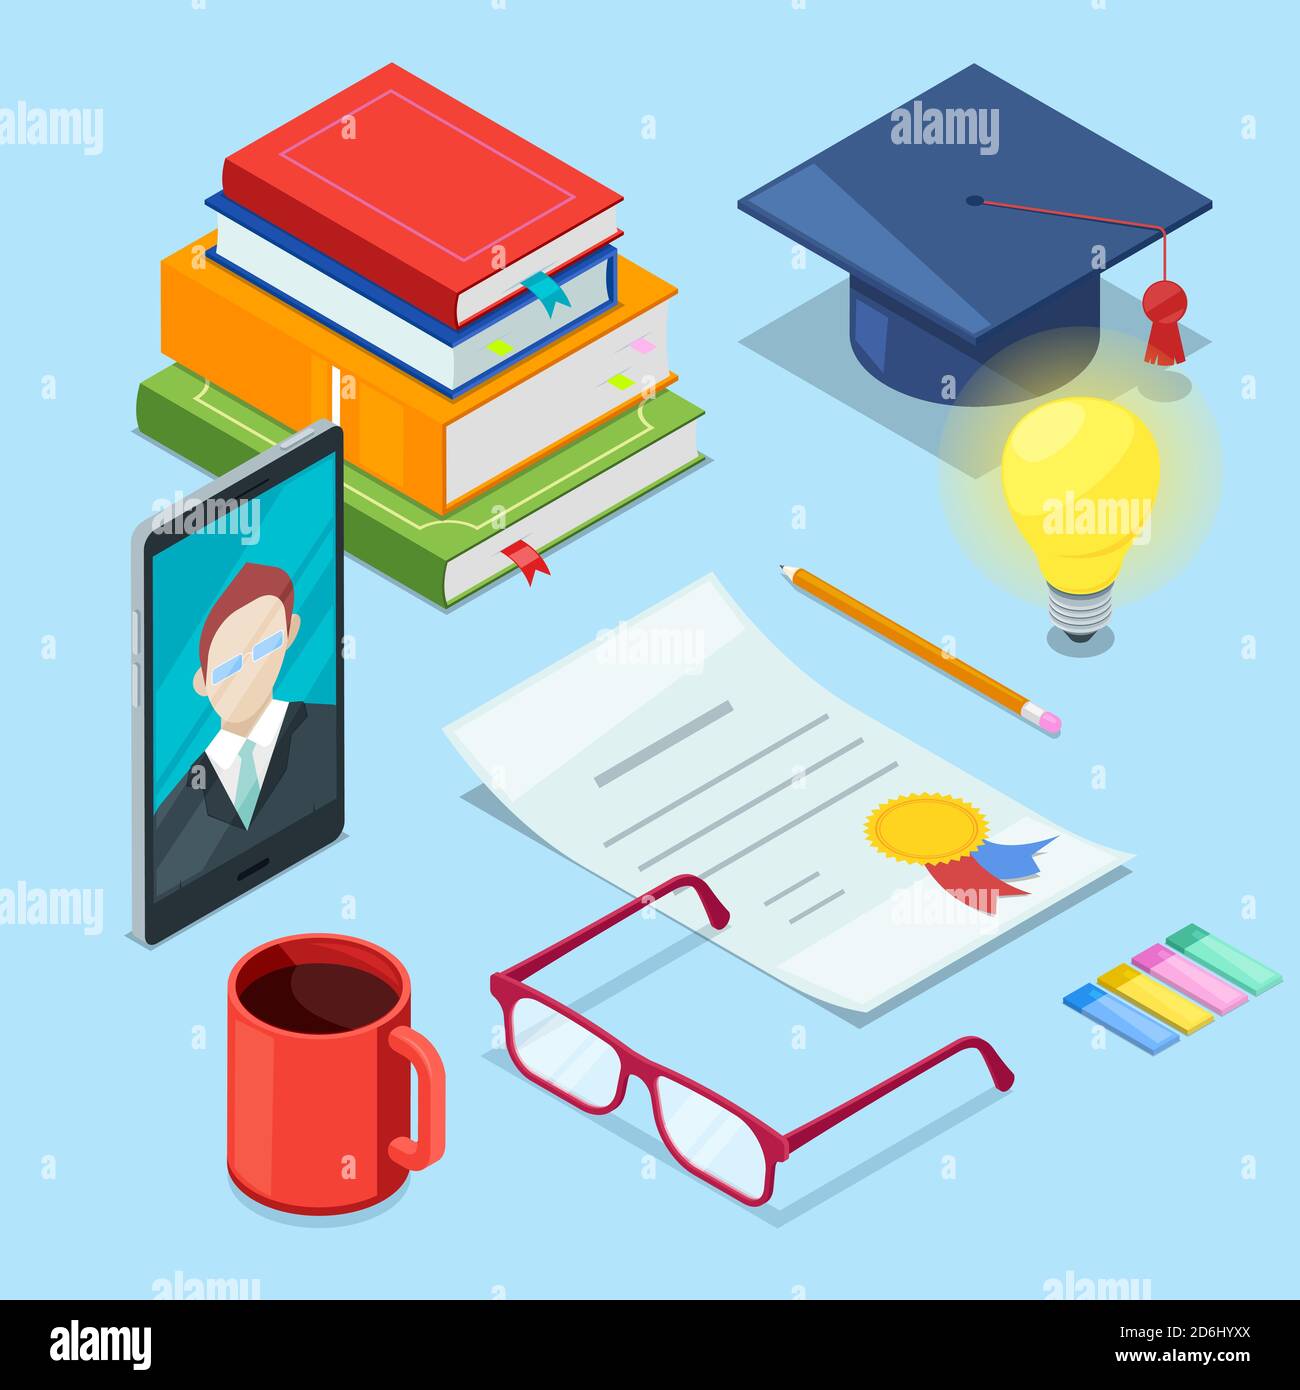 Online education and study. Vector 3d isometric icons of smartphone, books and diploma. Web learning and training concept. Stock Vector